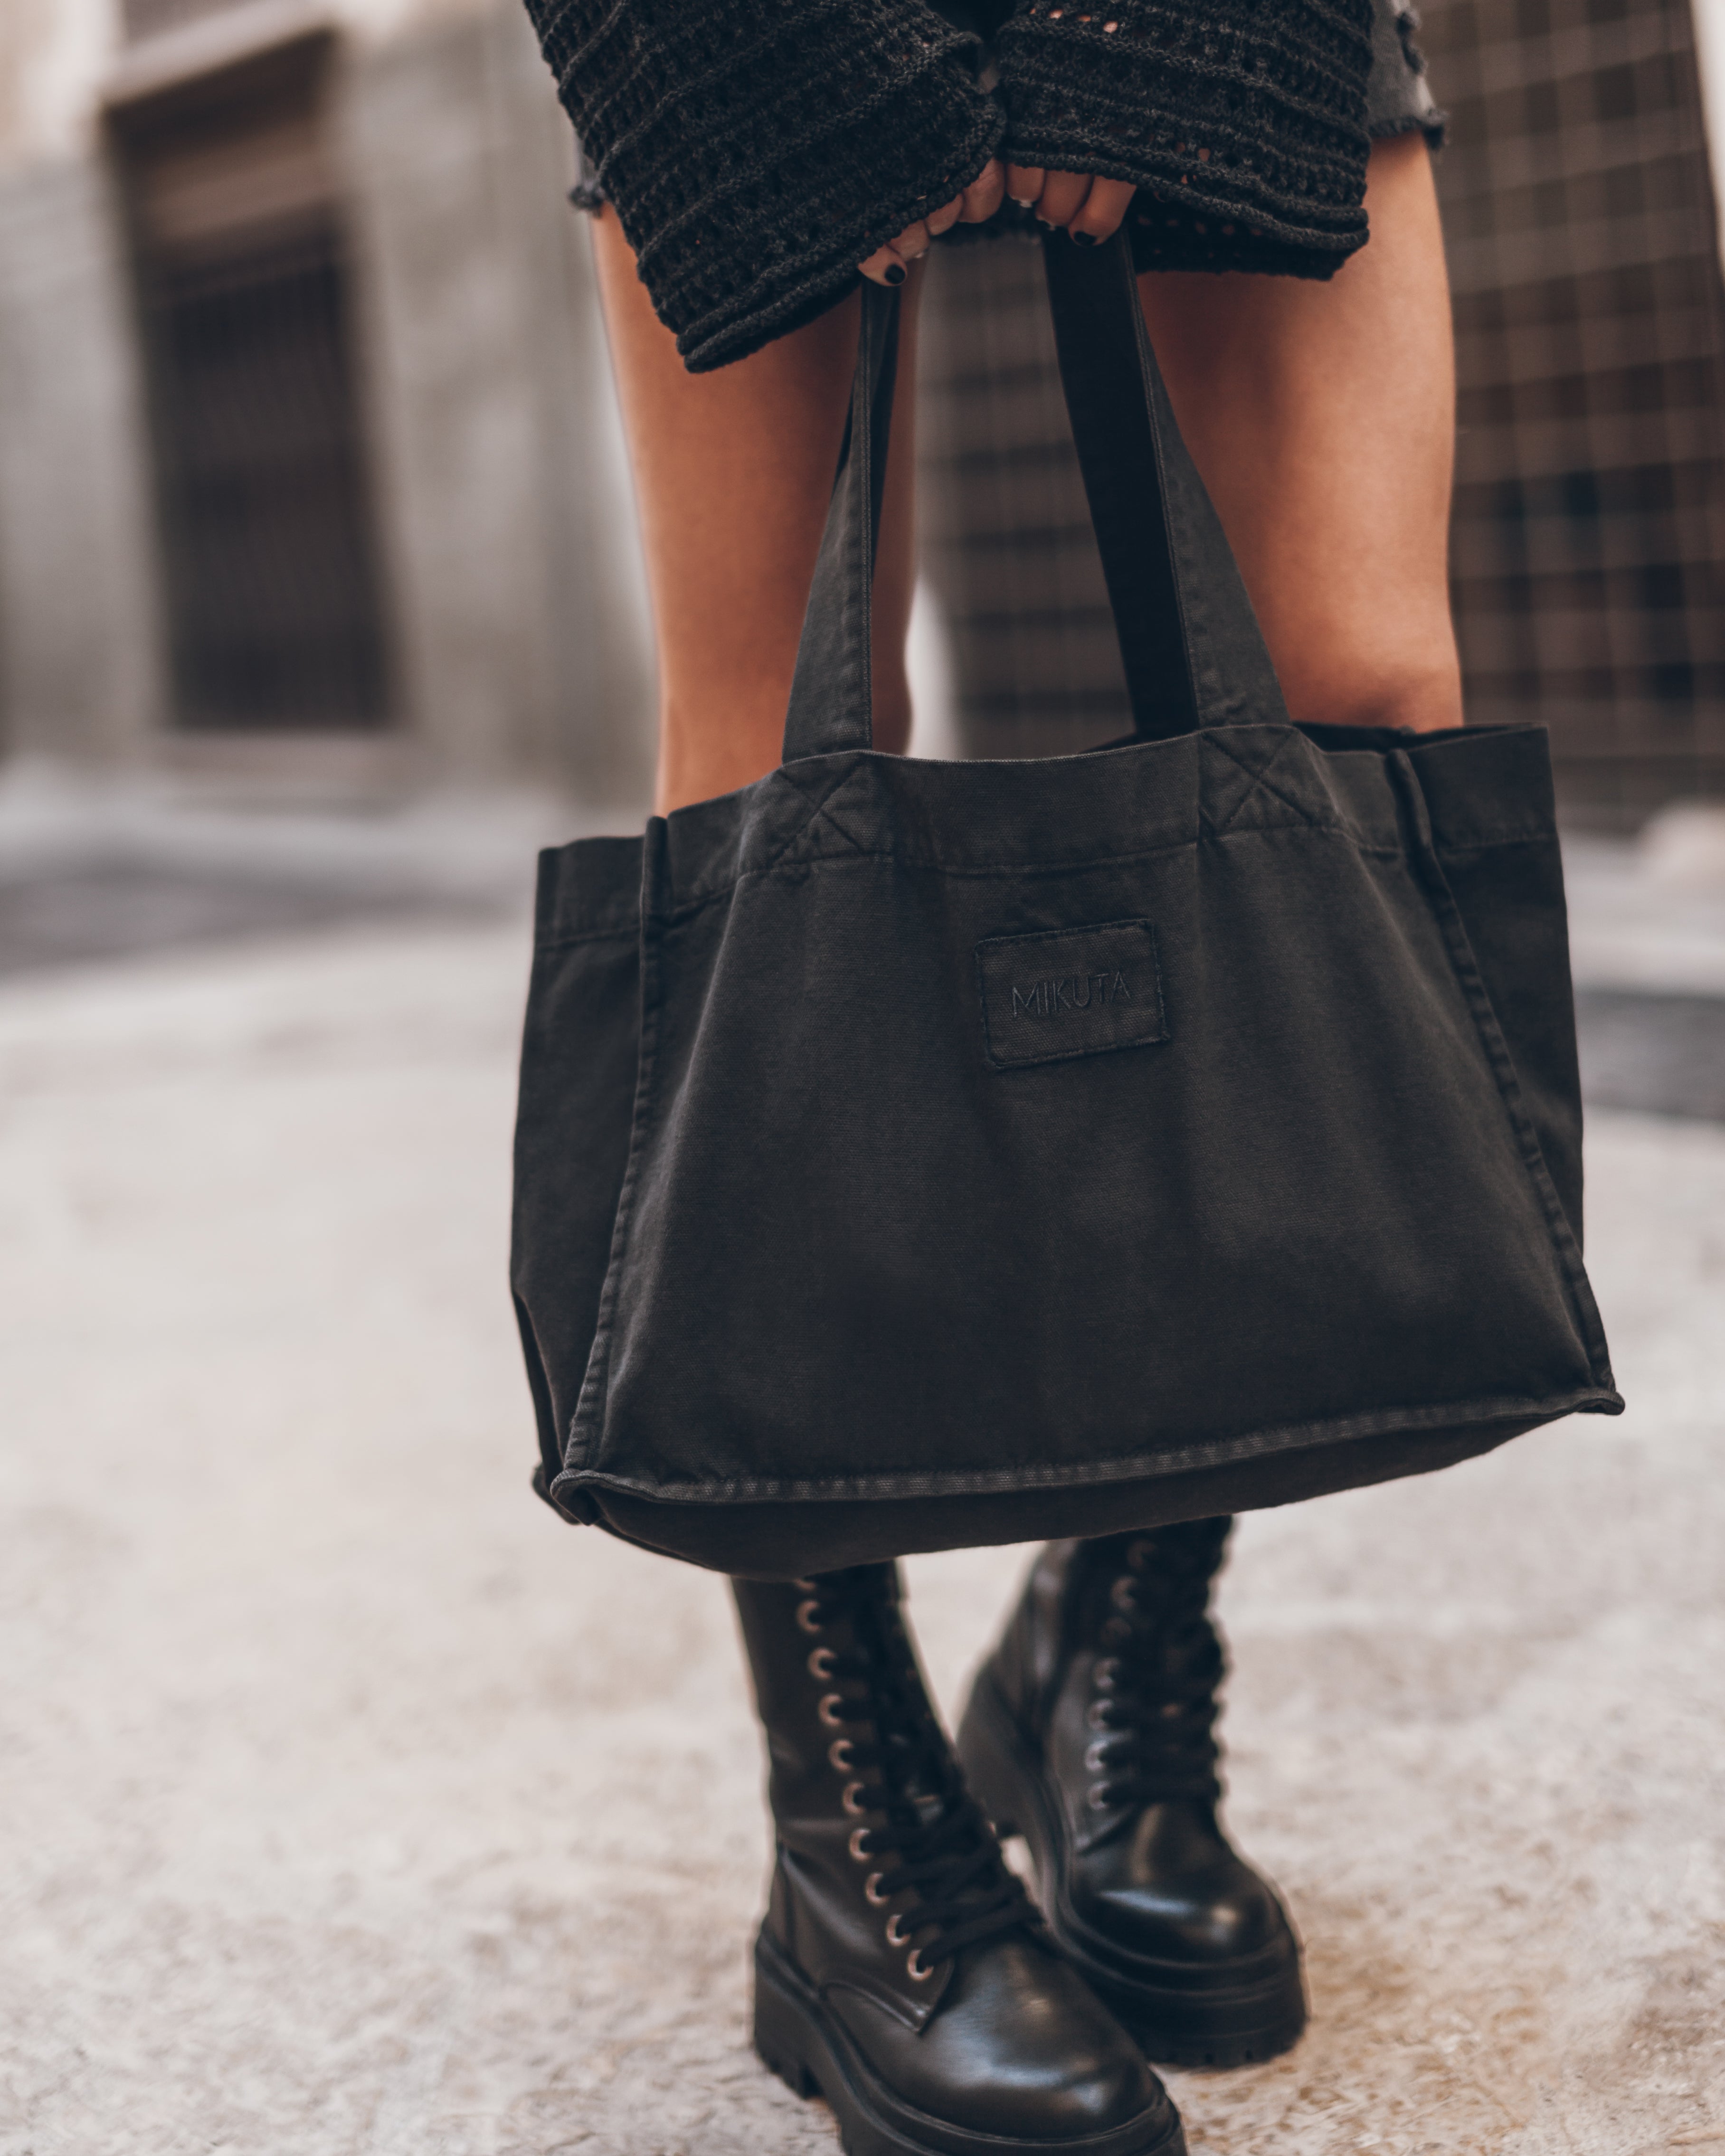 The Charcoal Small Canvas Bag